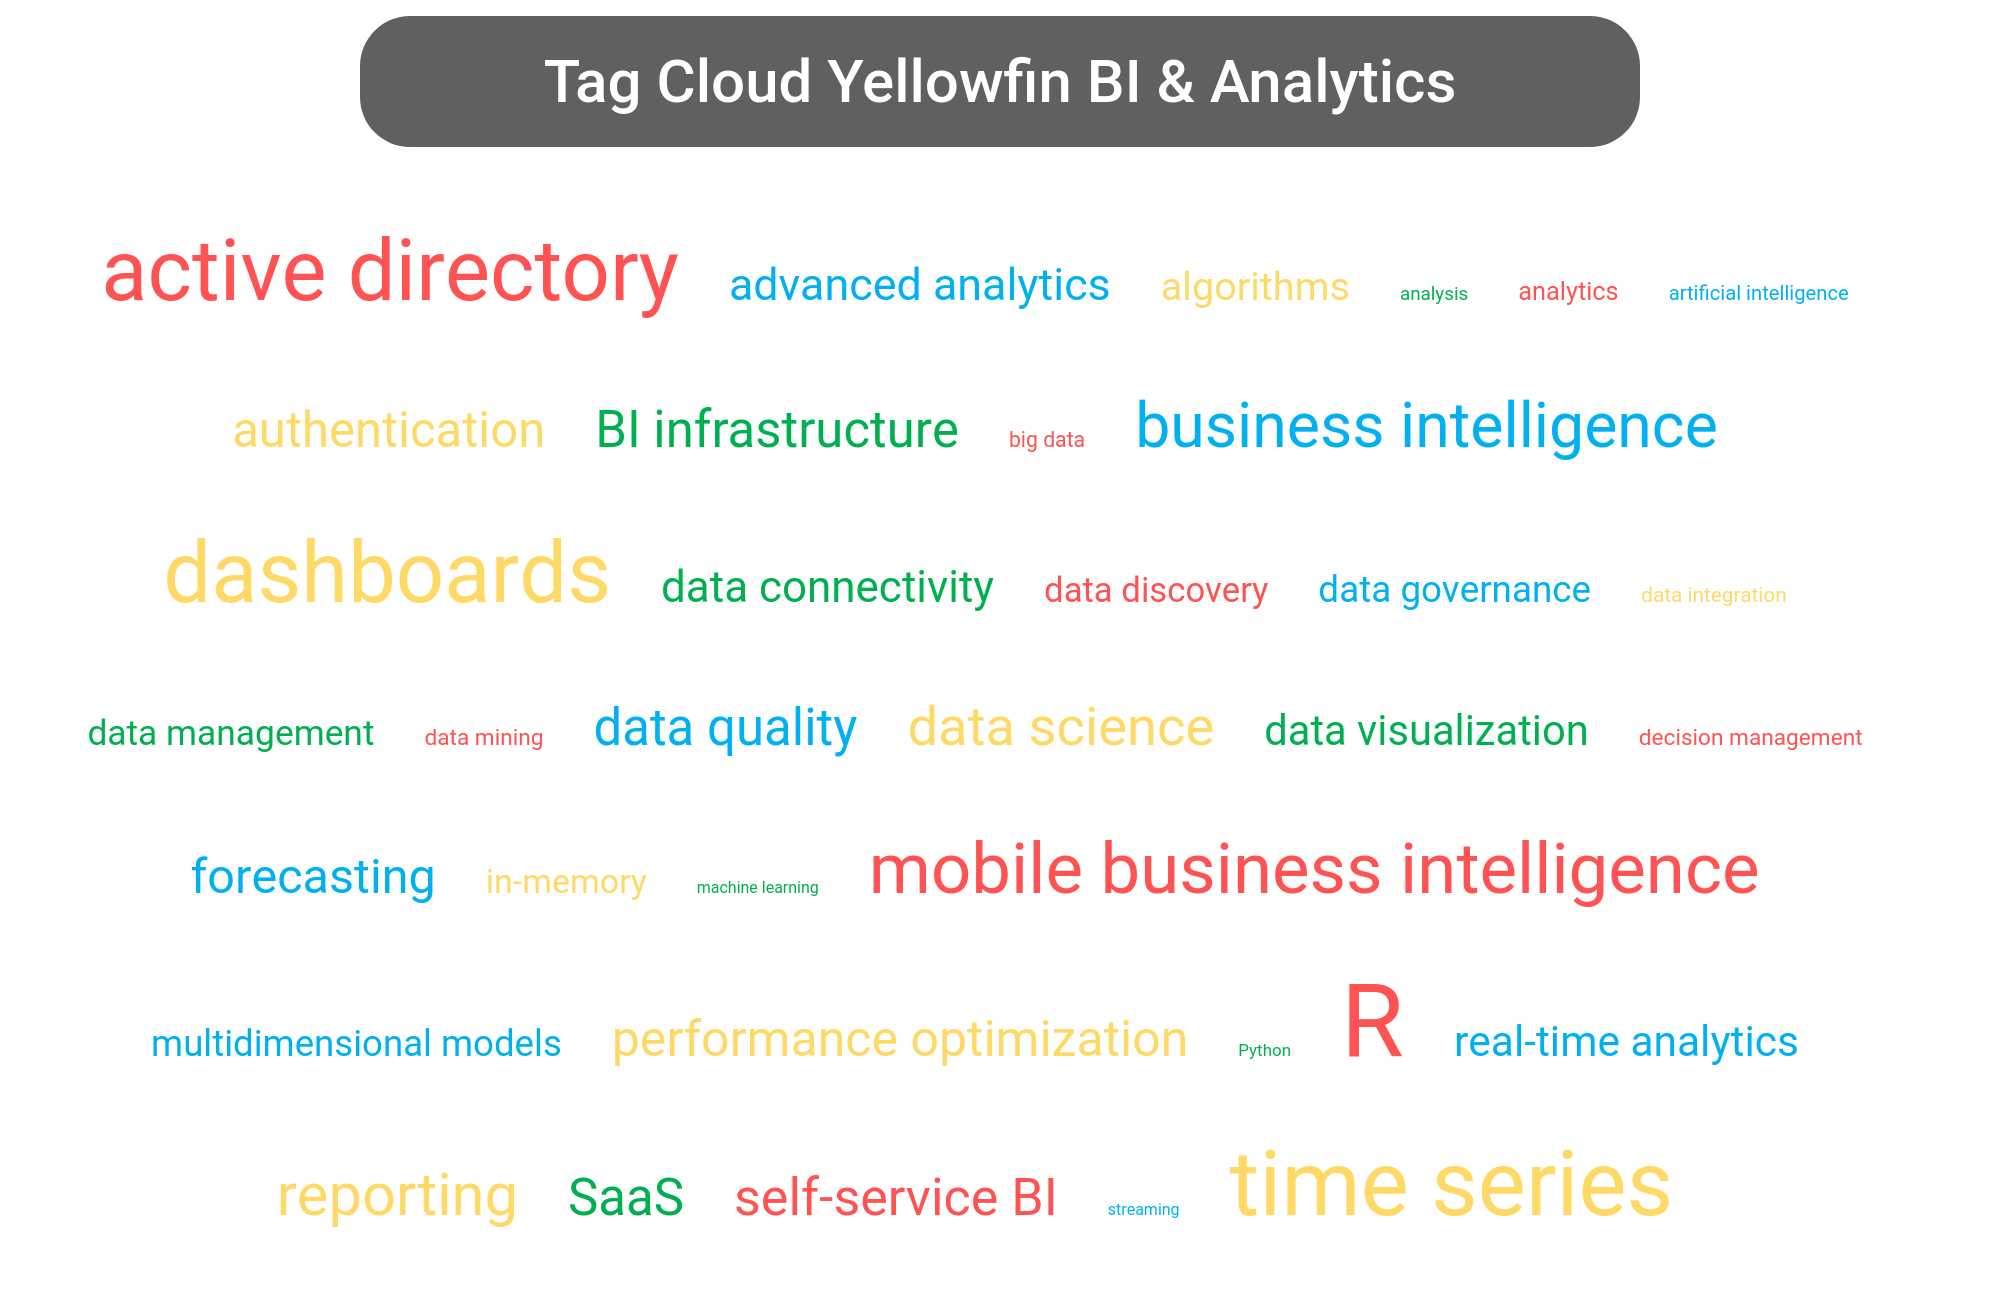 Tag cloud of the Yellowfin Business Analytics tools.